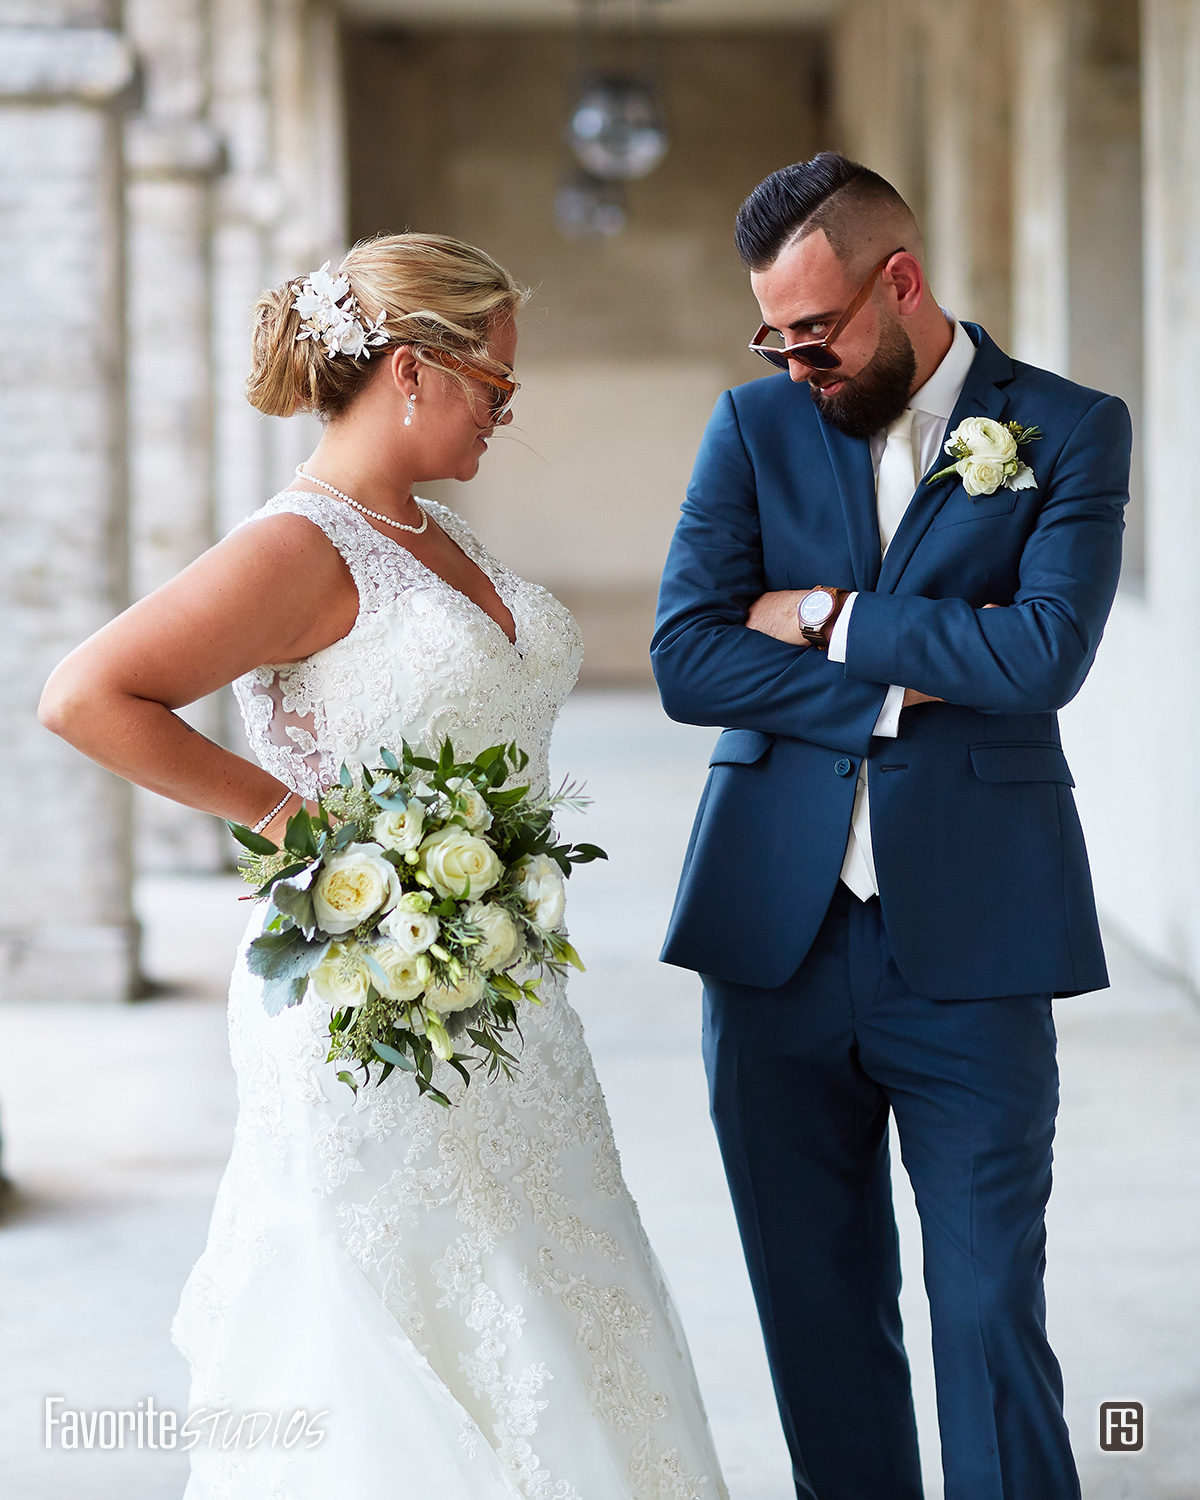 Bridesmaids and Groomsmen Poses and Detail Images